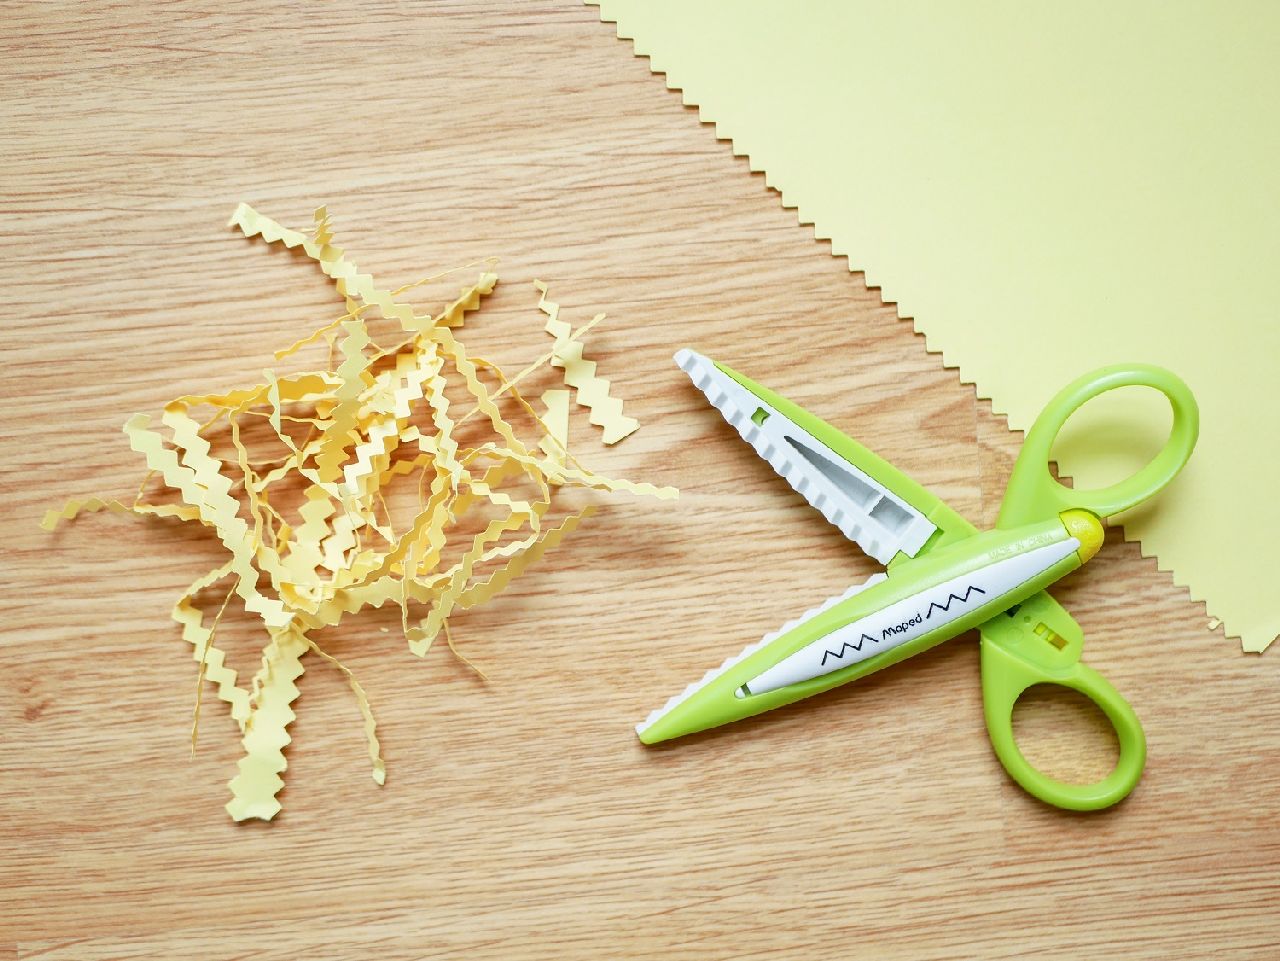 a pair of craft scissors sitting next to shredded paper